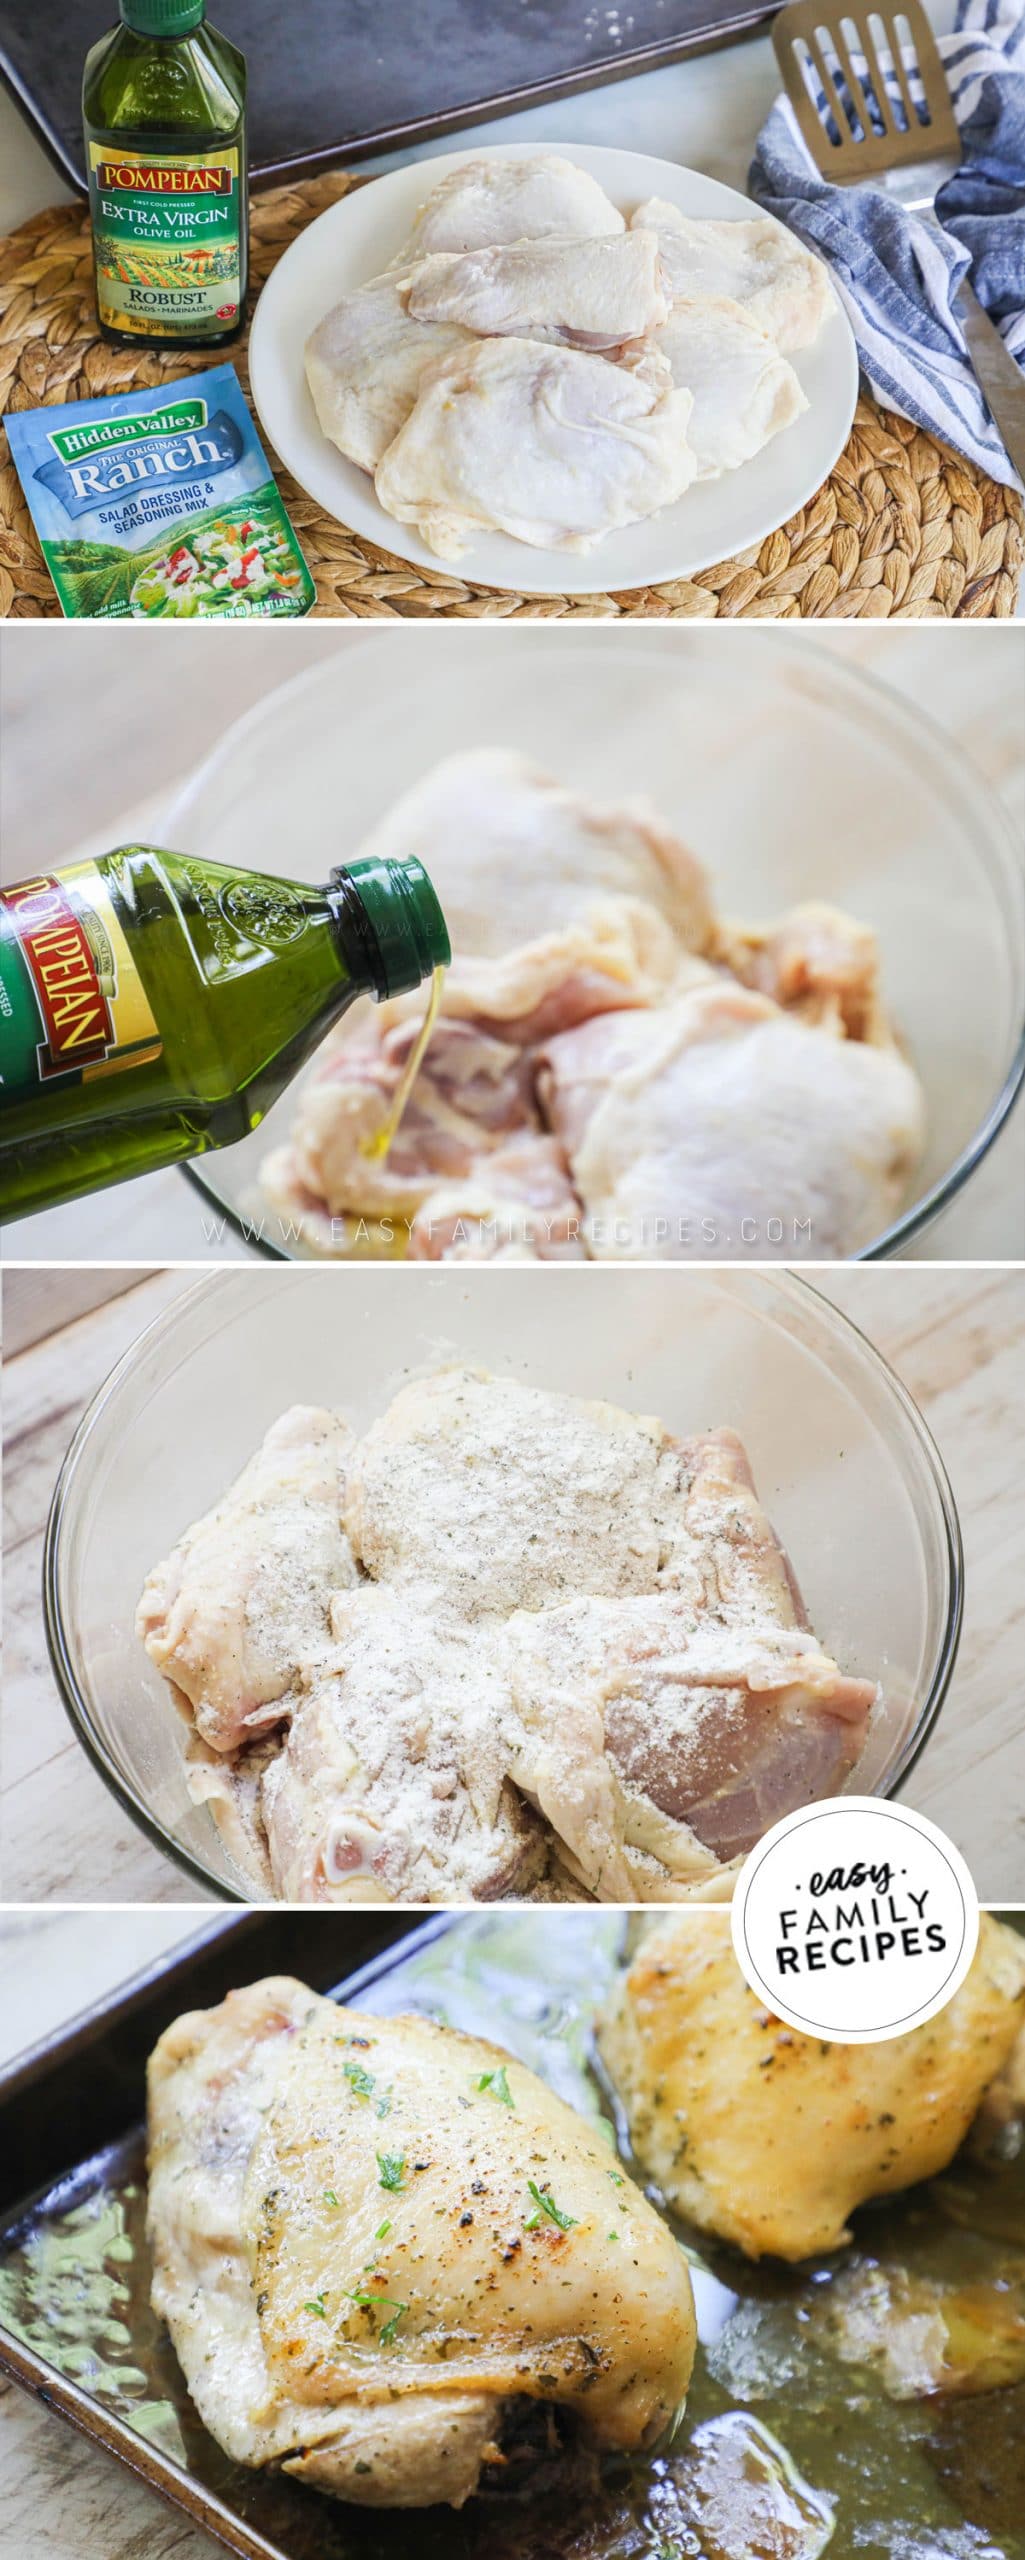 Process photos for how to make ranch baked chicken thighs. 1. Place bone in chicken thighs in a bowl. 2. Add olive oil. 3. add hidden valley ranch seasoning mix and toss. 4. Arrange on a baking sheet and roast in the oven until crispy and cooked through.